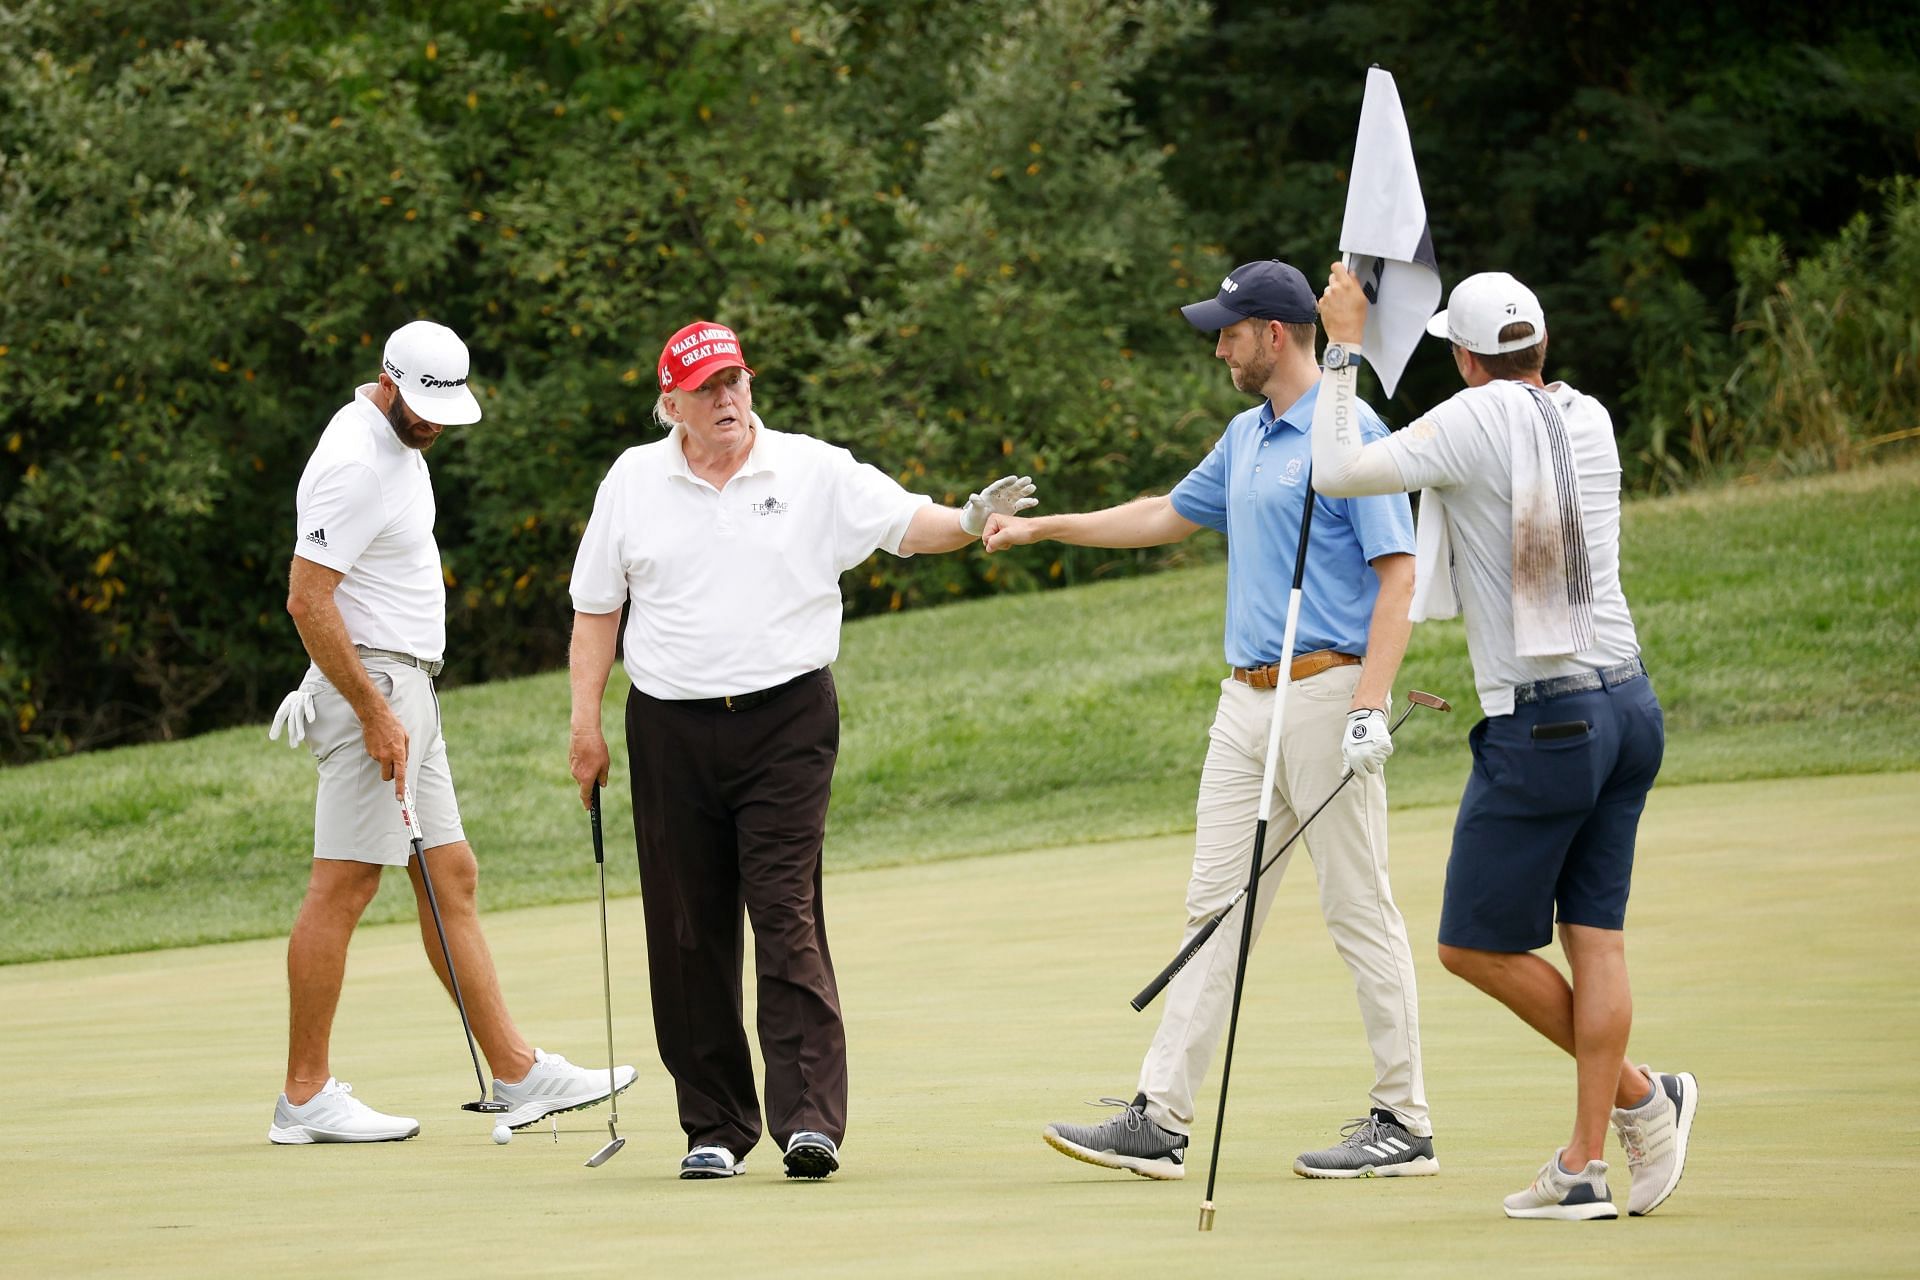 Dustin Johnson and Donald Trump at the LIV Golf Invitational - Bedminster - Pro-Am (Image via Cliff Hawkins/Getty Images)